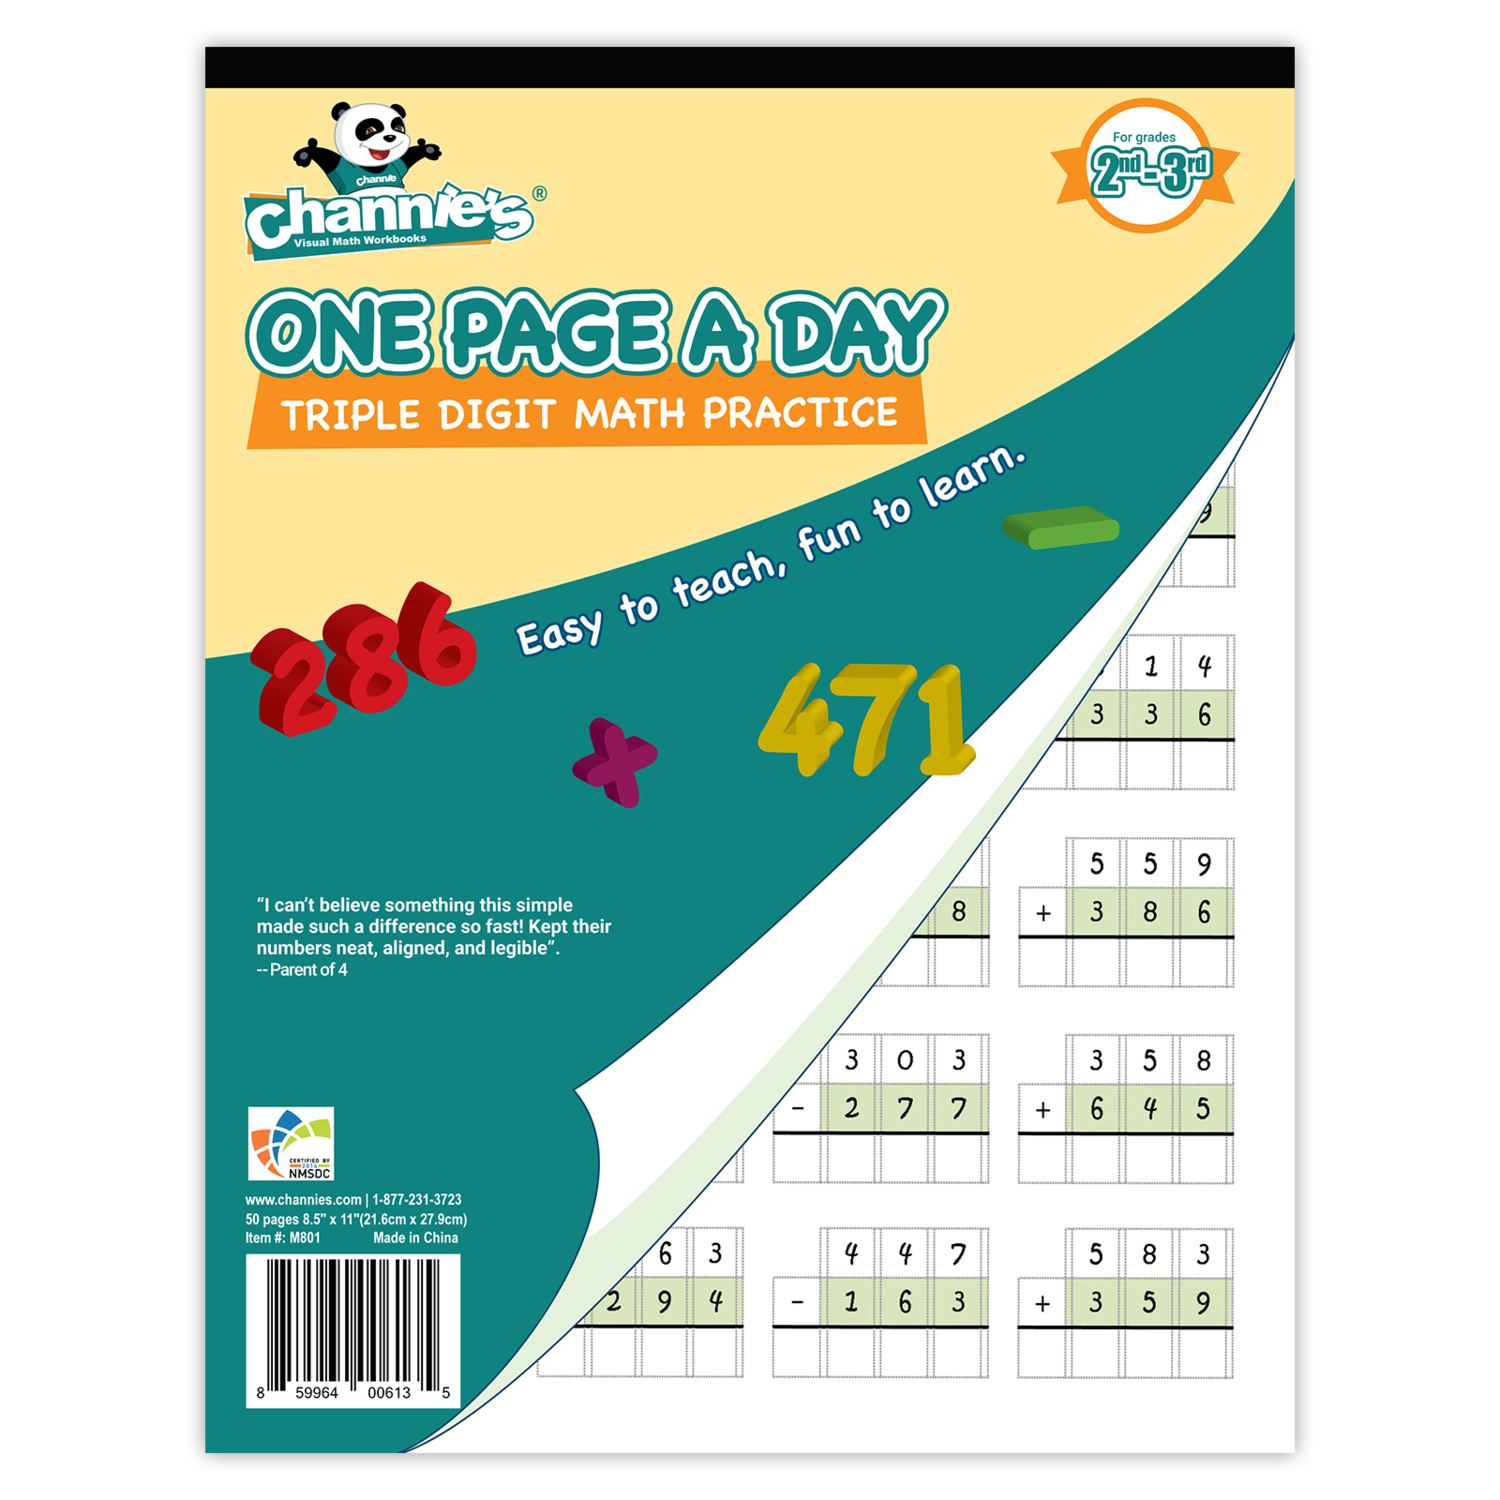 Channie’s One Page A Day Triple Digit Math Practice